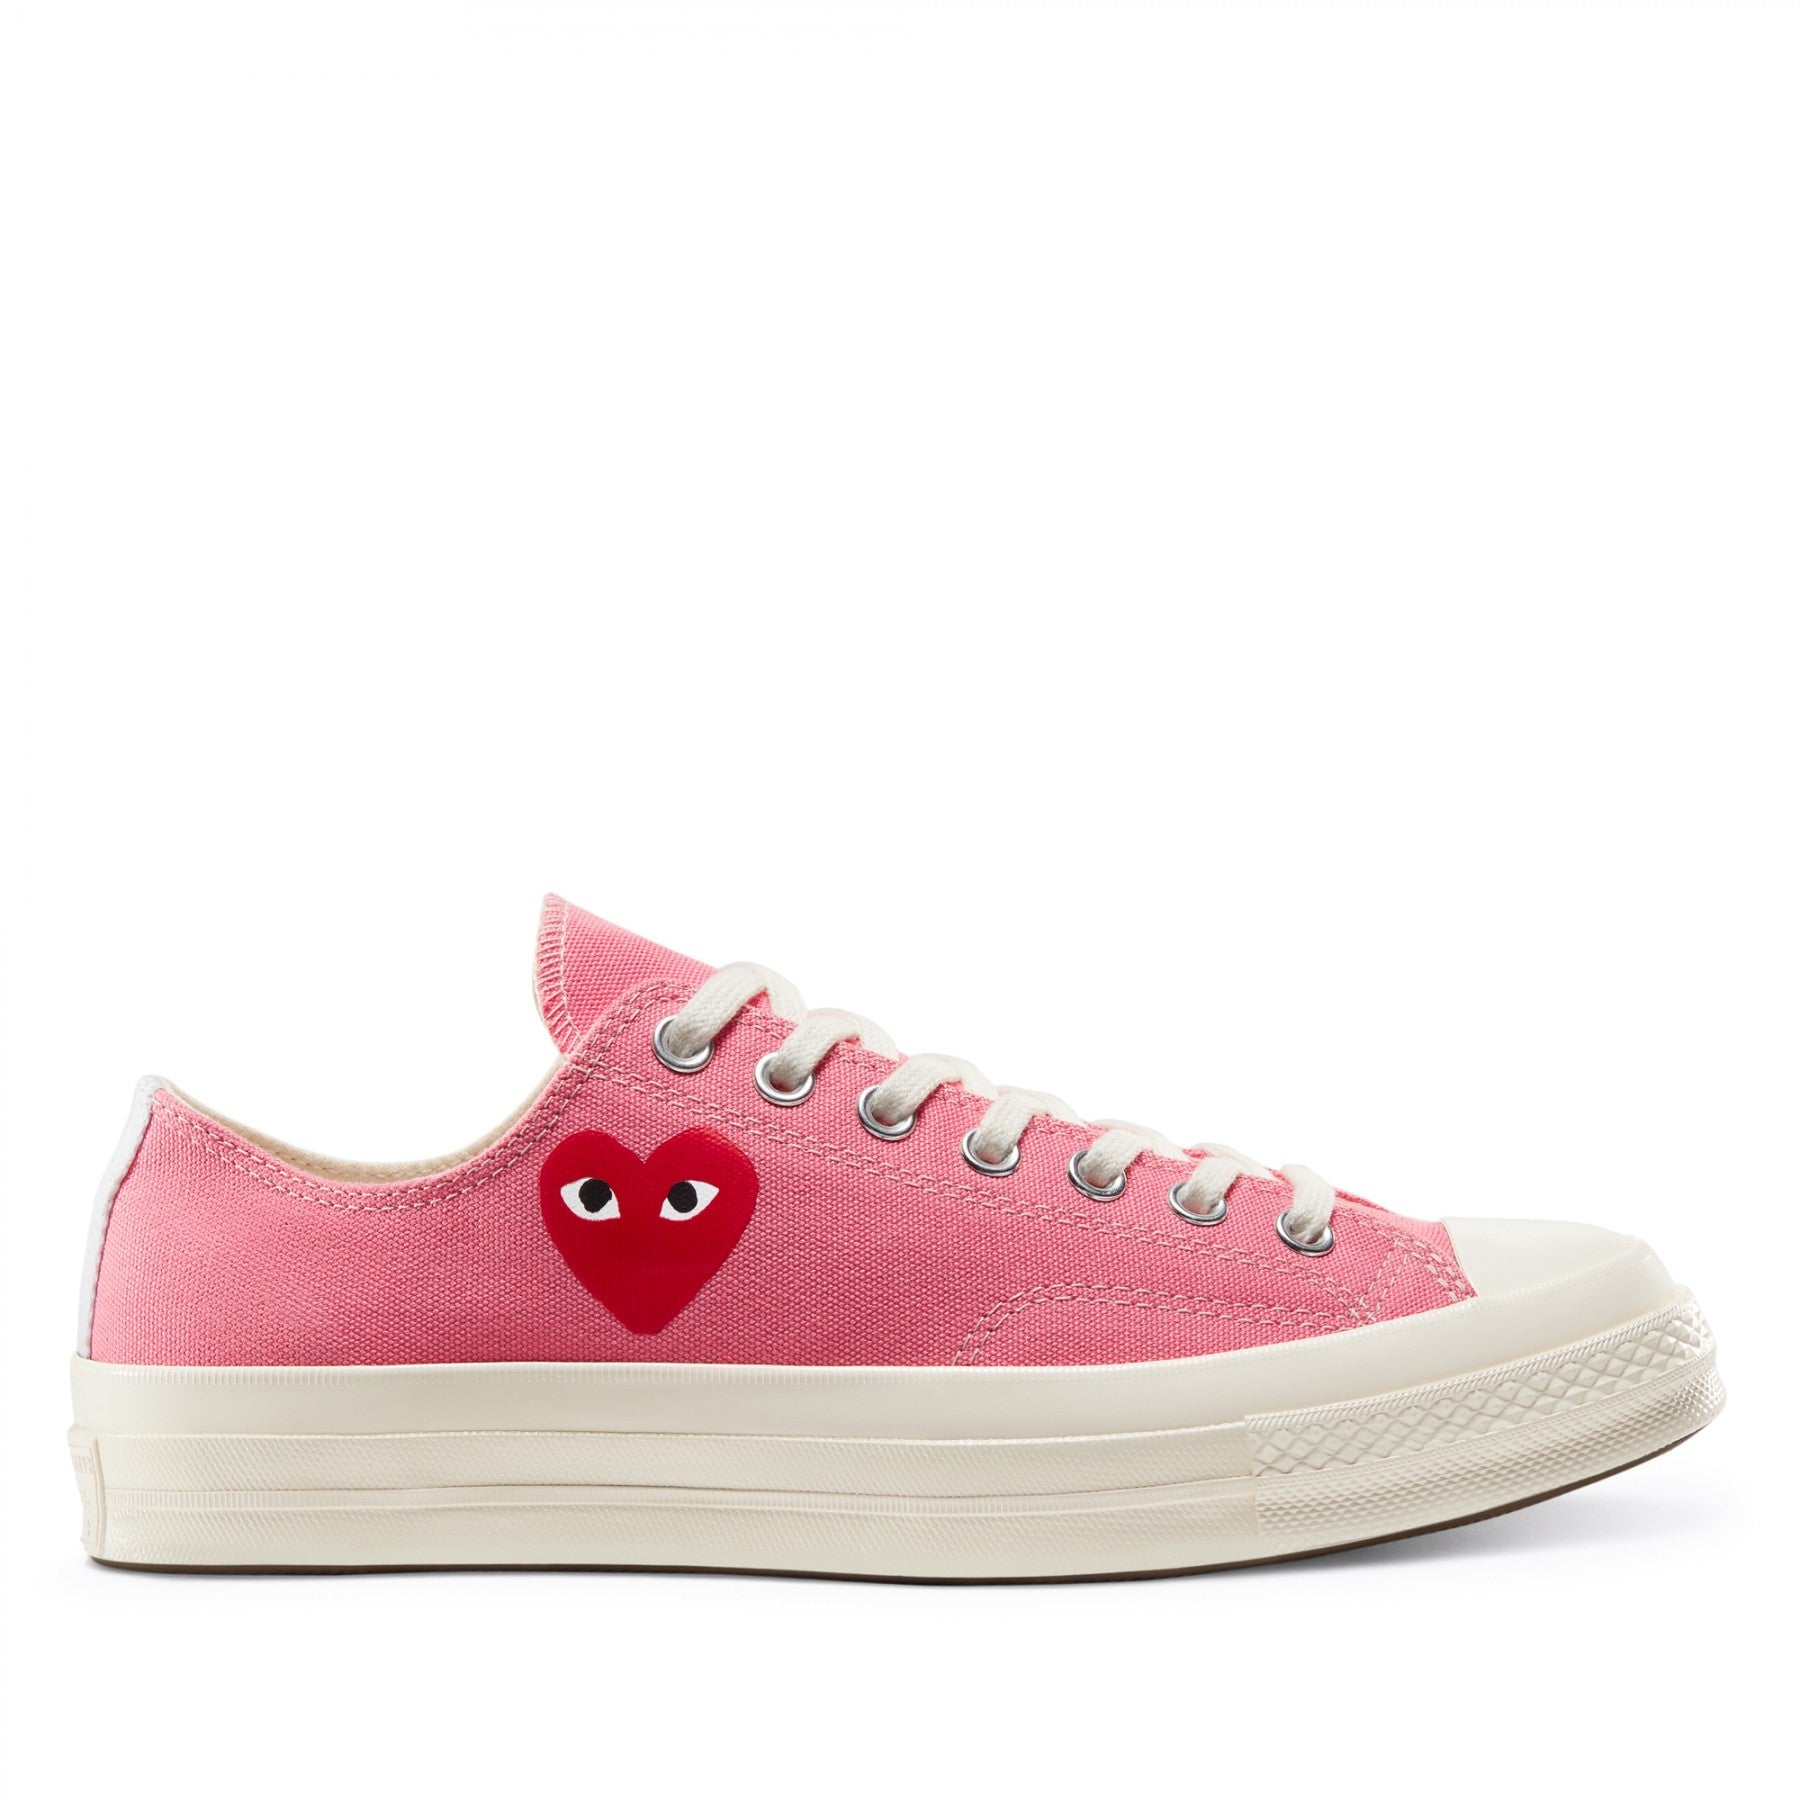 converse neon pink low tops